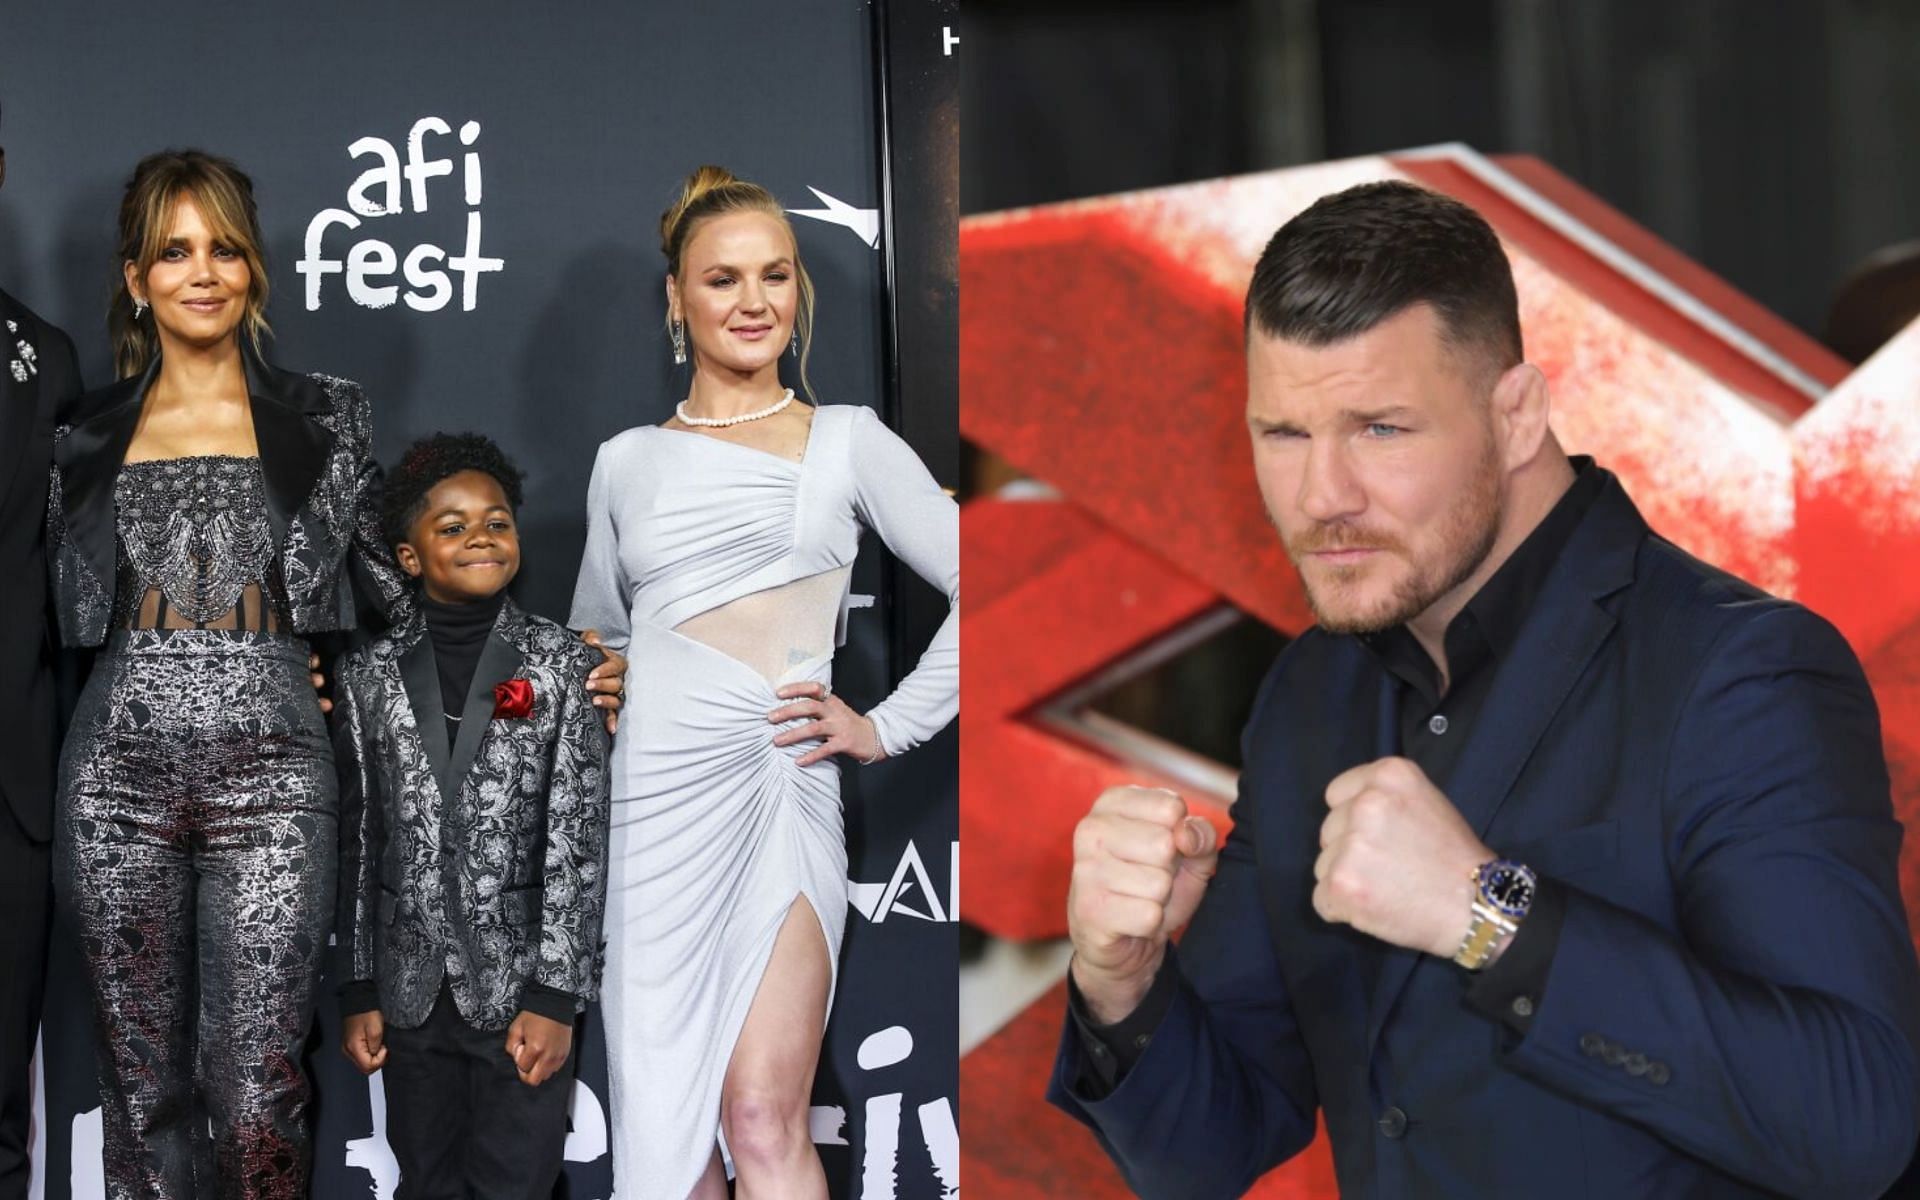 Valentina Shevchenko (in white) with Halle Berry (in black) &amp; Michael Bisping